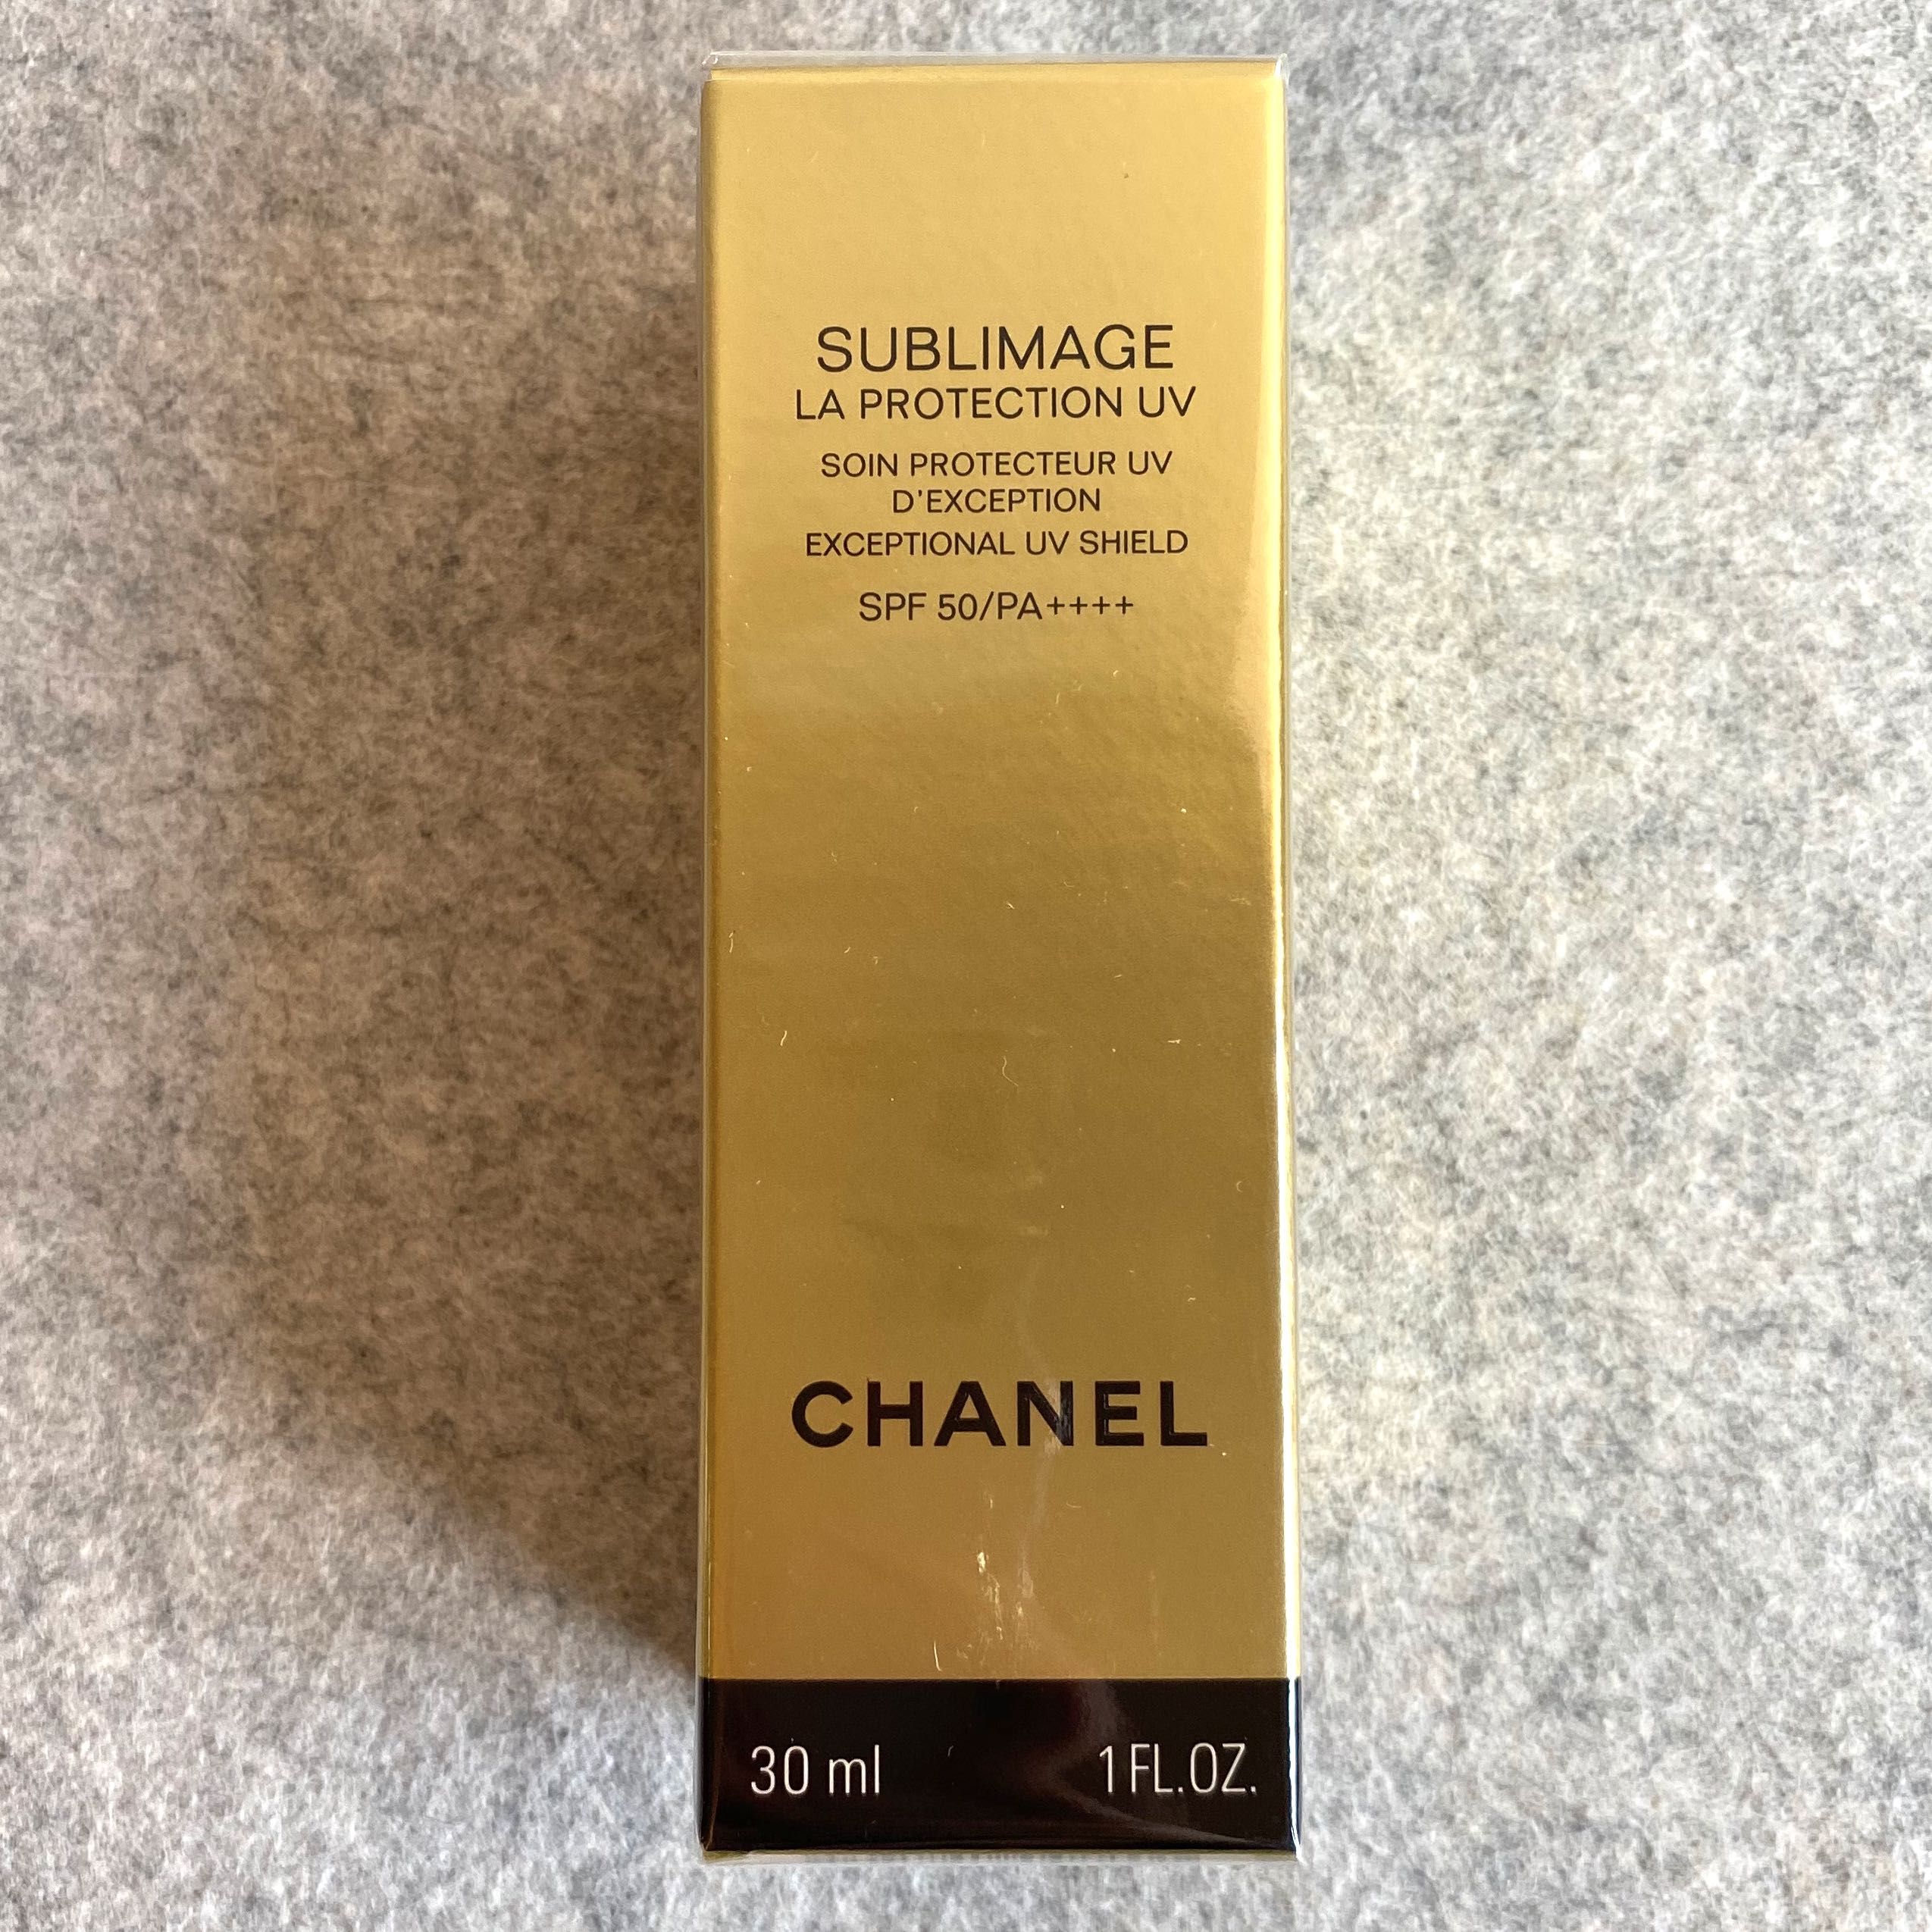 Chanel Sublimage la Protection UV and Bourjois compare  YouTube